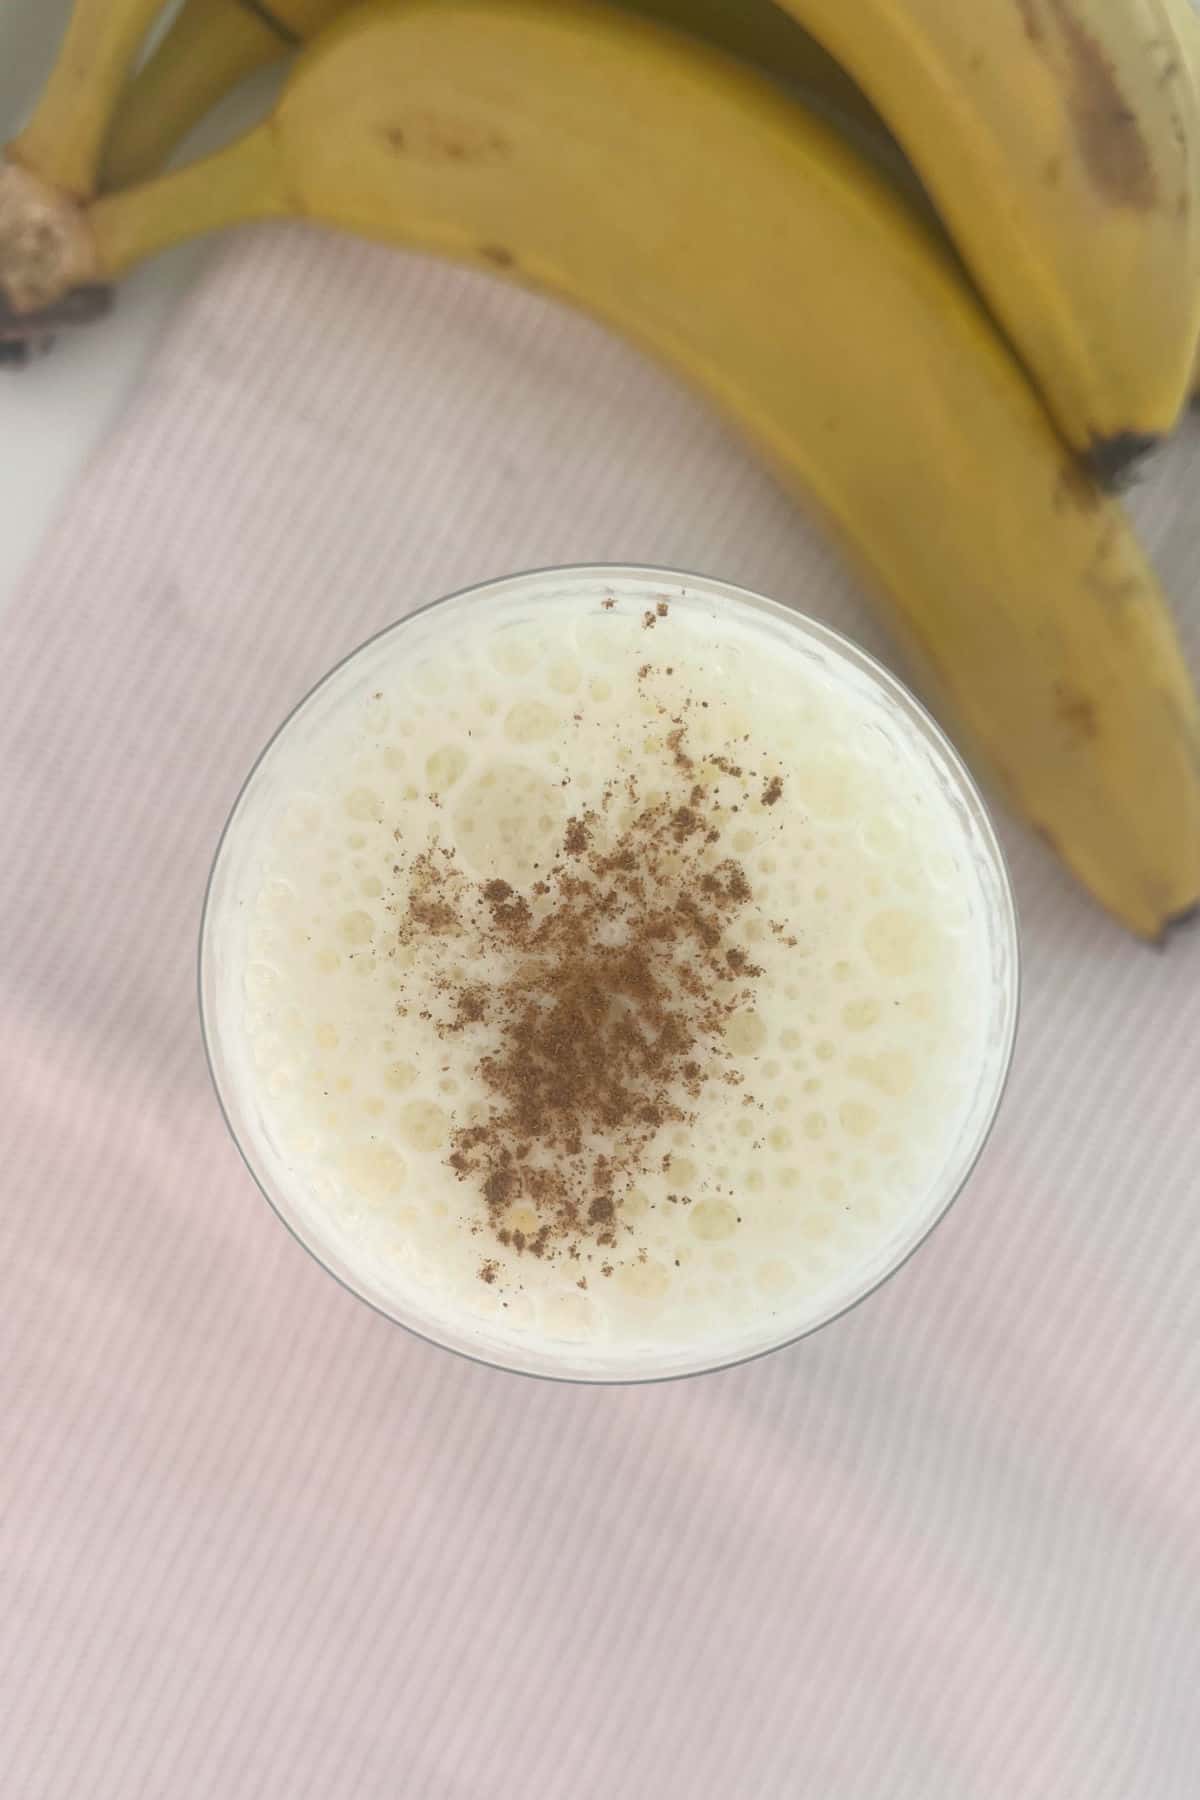 Close up overhead view of a banana smoothie sprinkled with cinnamon. In the background there is a bunch of bananas.